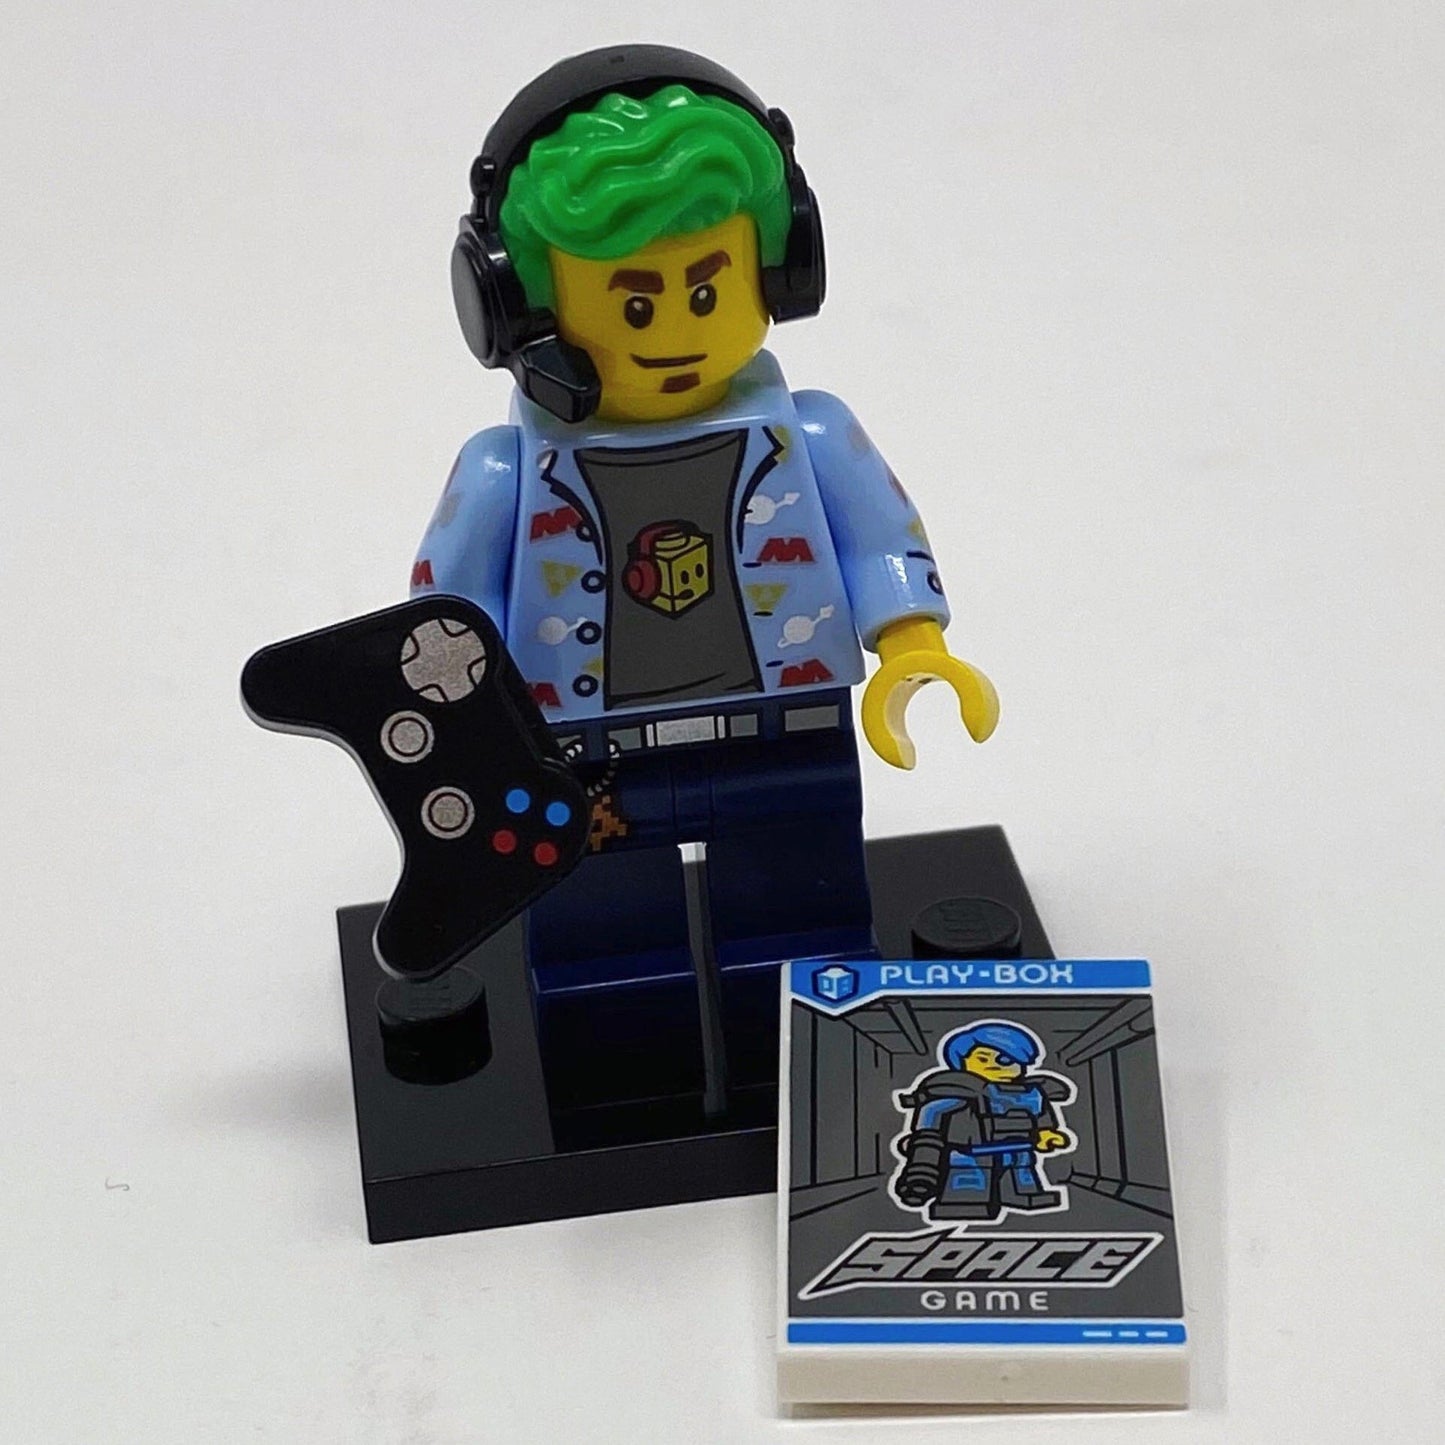 S19 Video Game Champ - Series 19 Minifigure (col341)